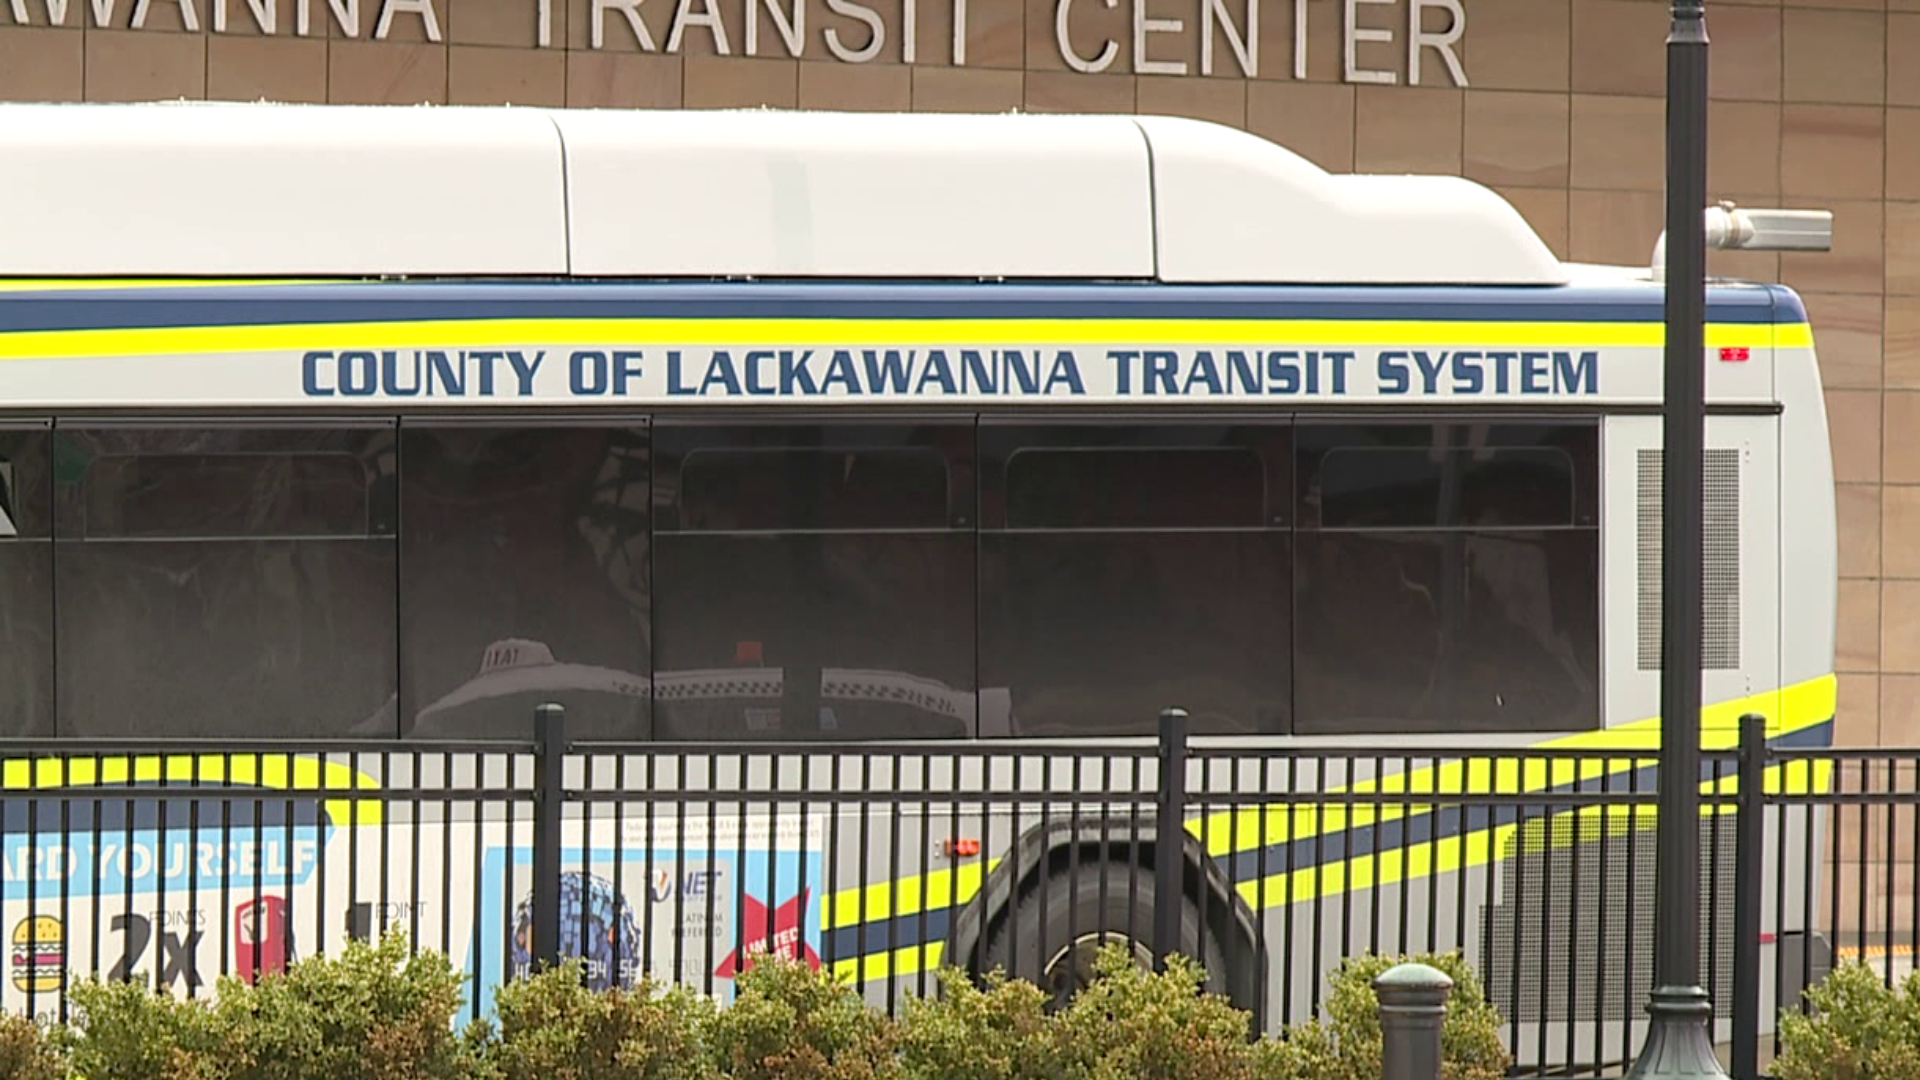 An update for those who use public transportation in Lackawanna County.